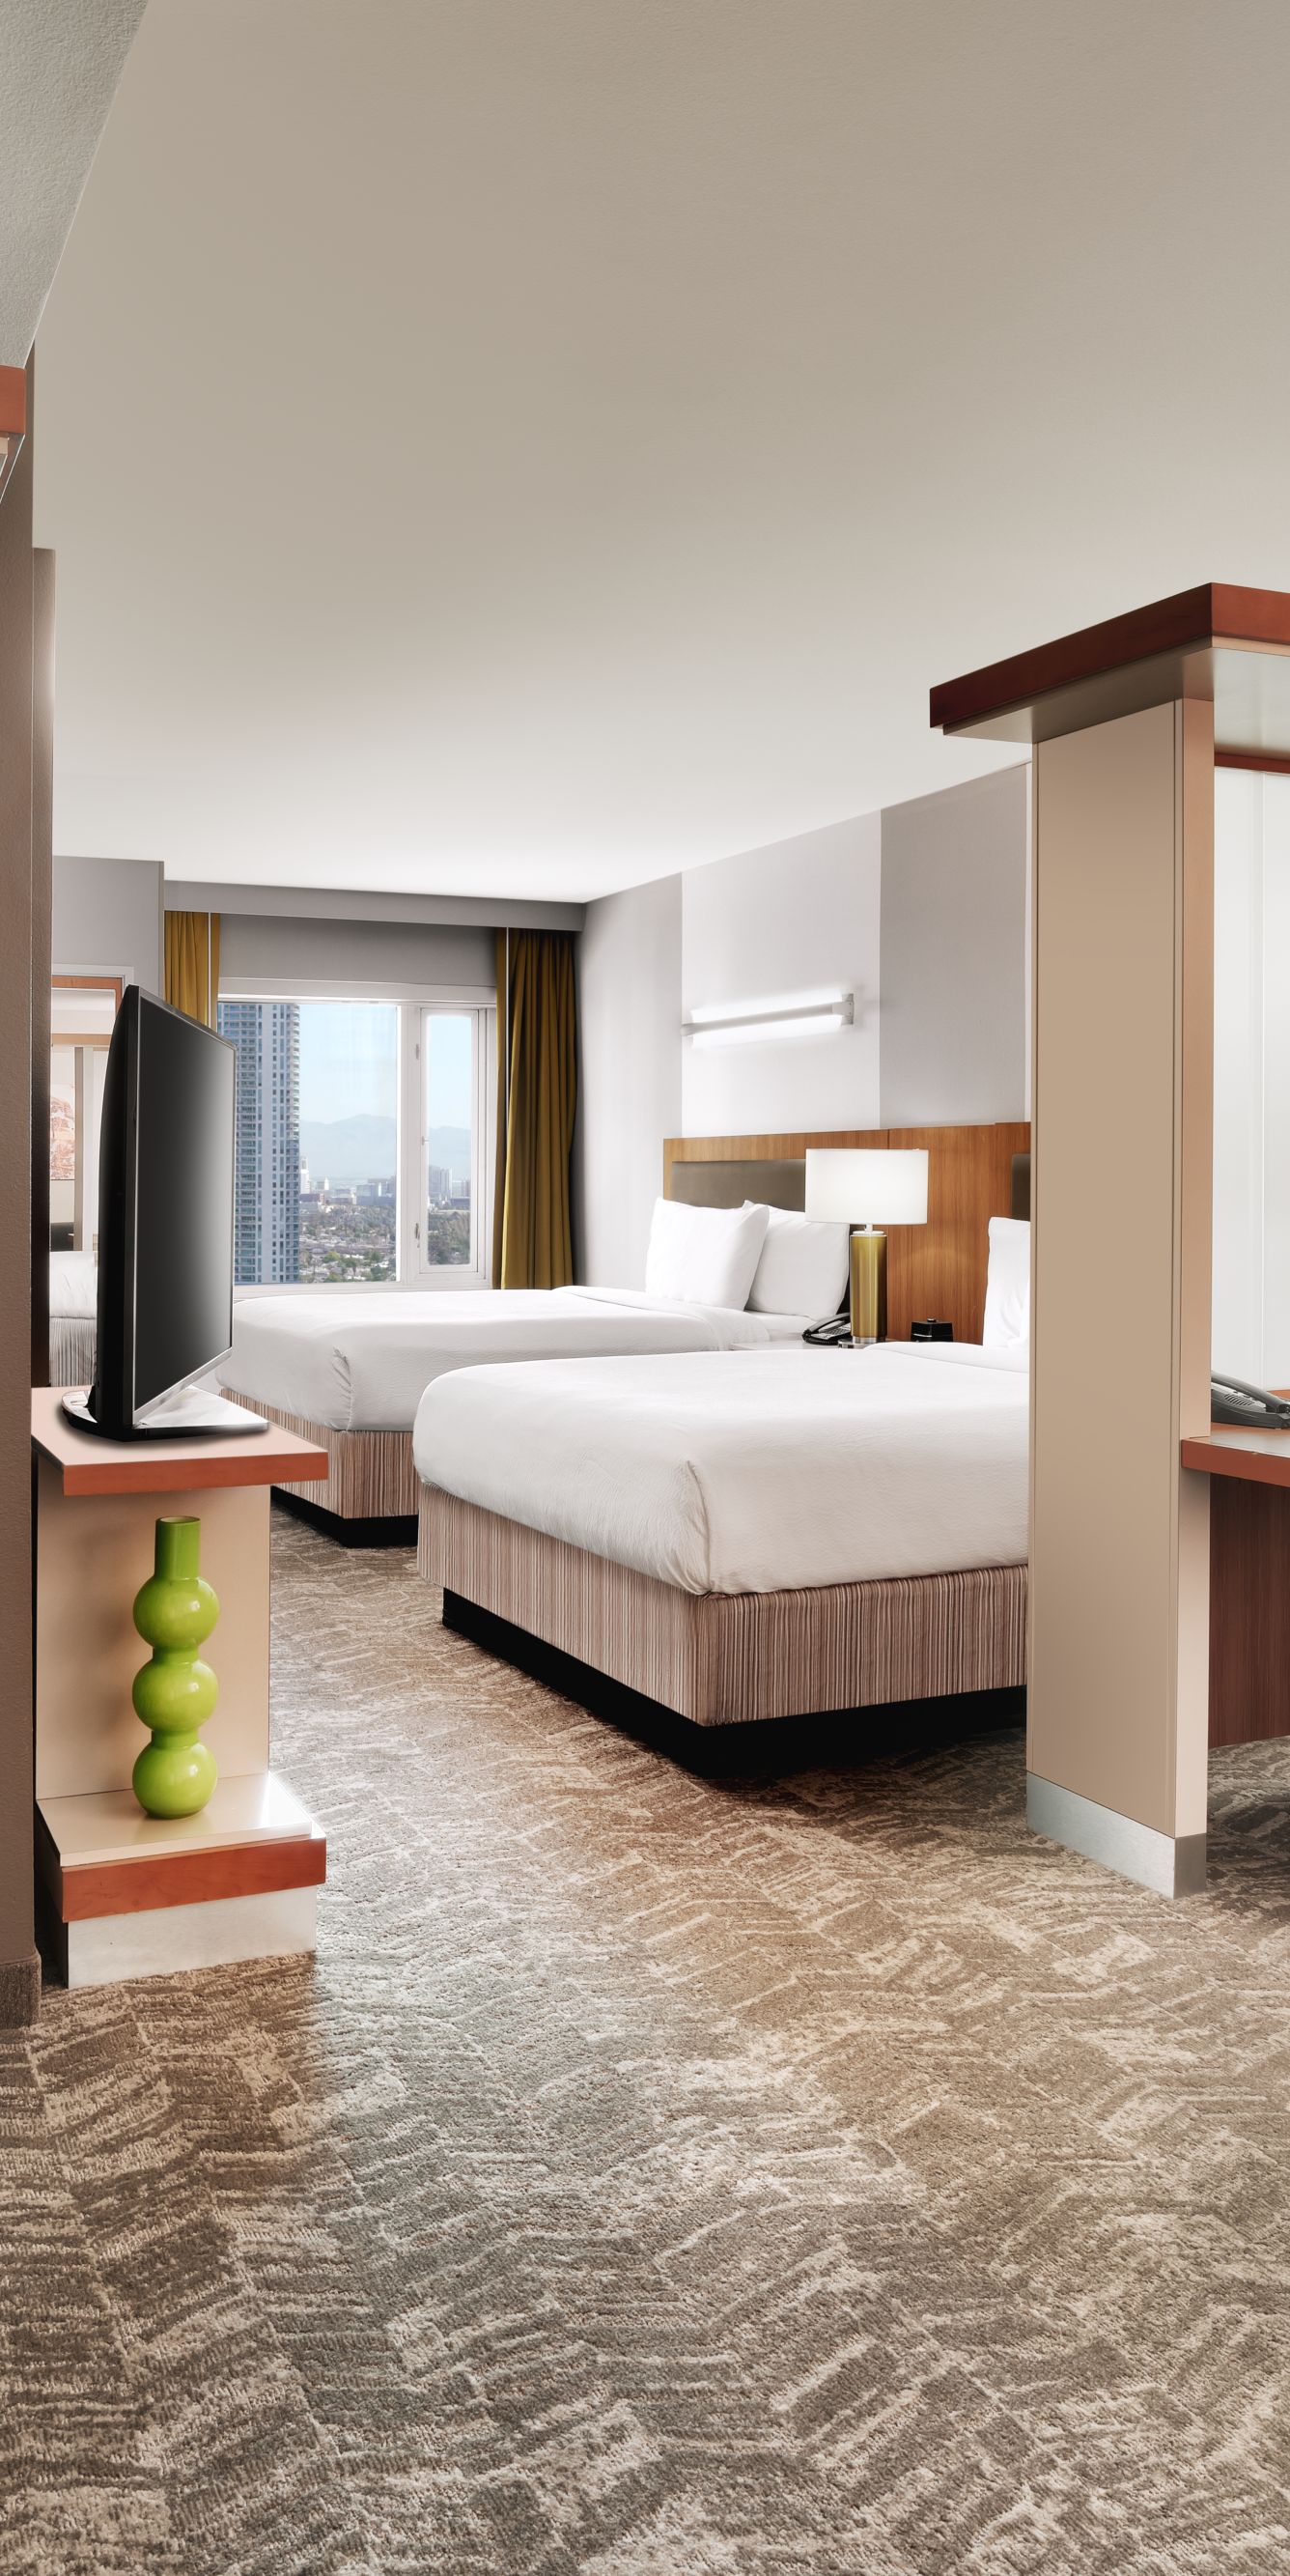 Extended-Stay Hotel in Las Vegas  SpringHill Suites Las Vegas Convention  Center